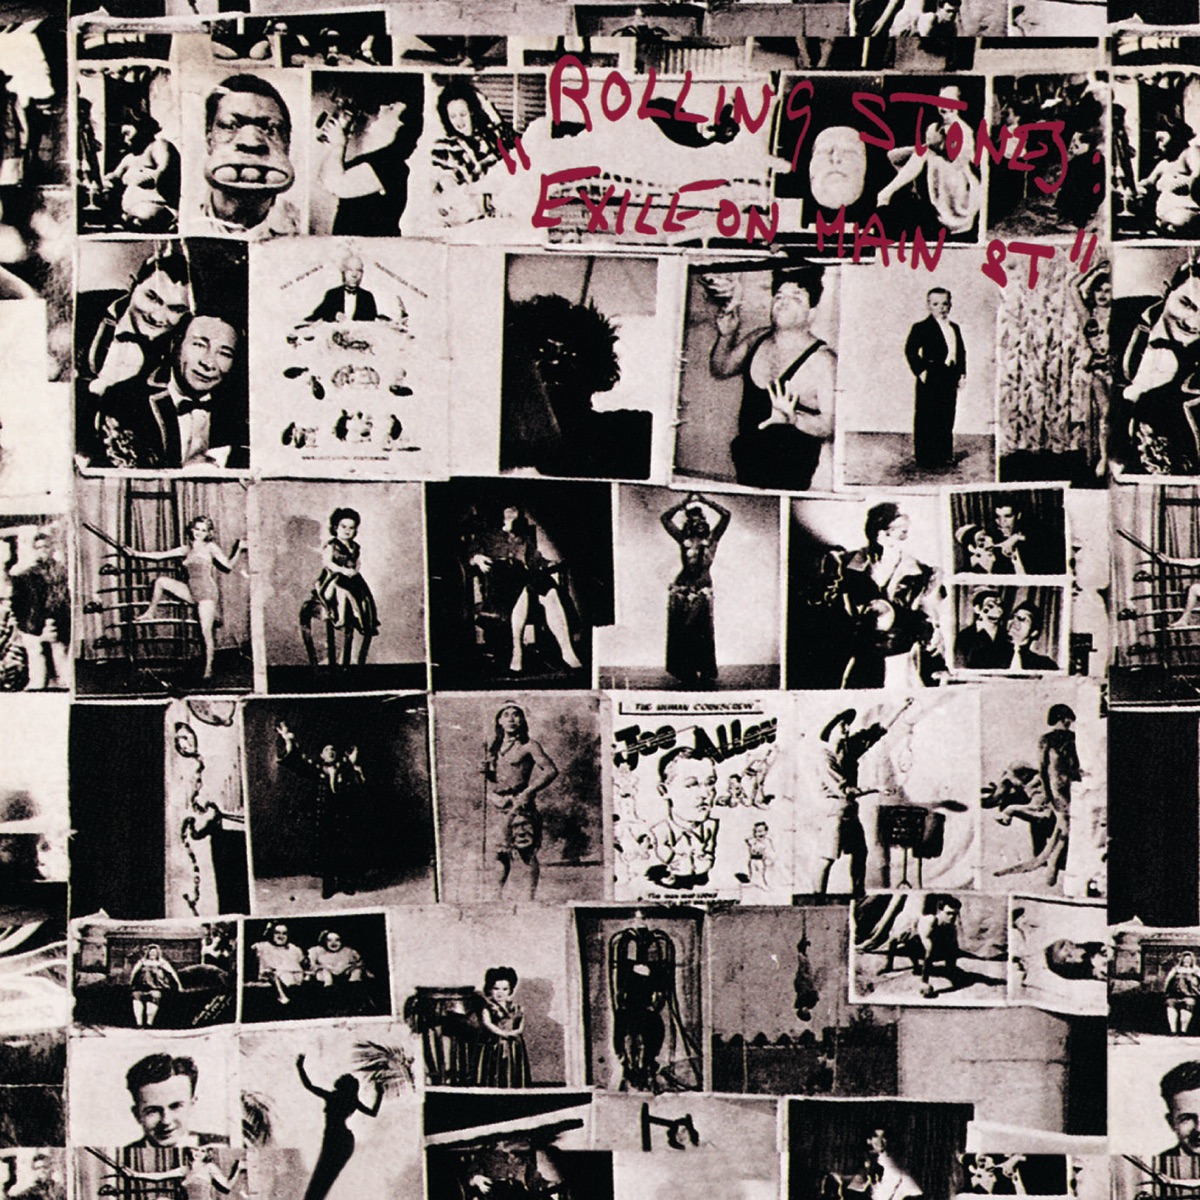 Exile on Main St. (2010 Remaster) by The Rolling Stones on Apple Music